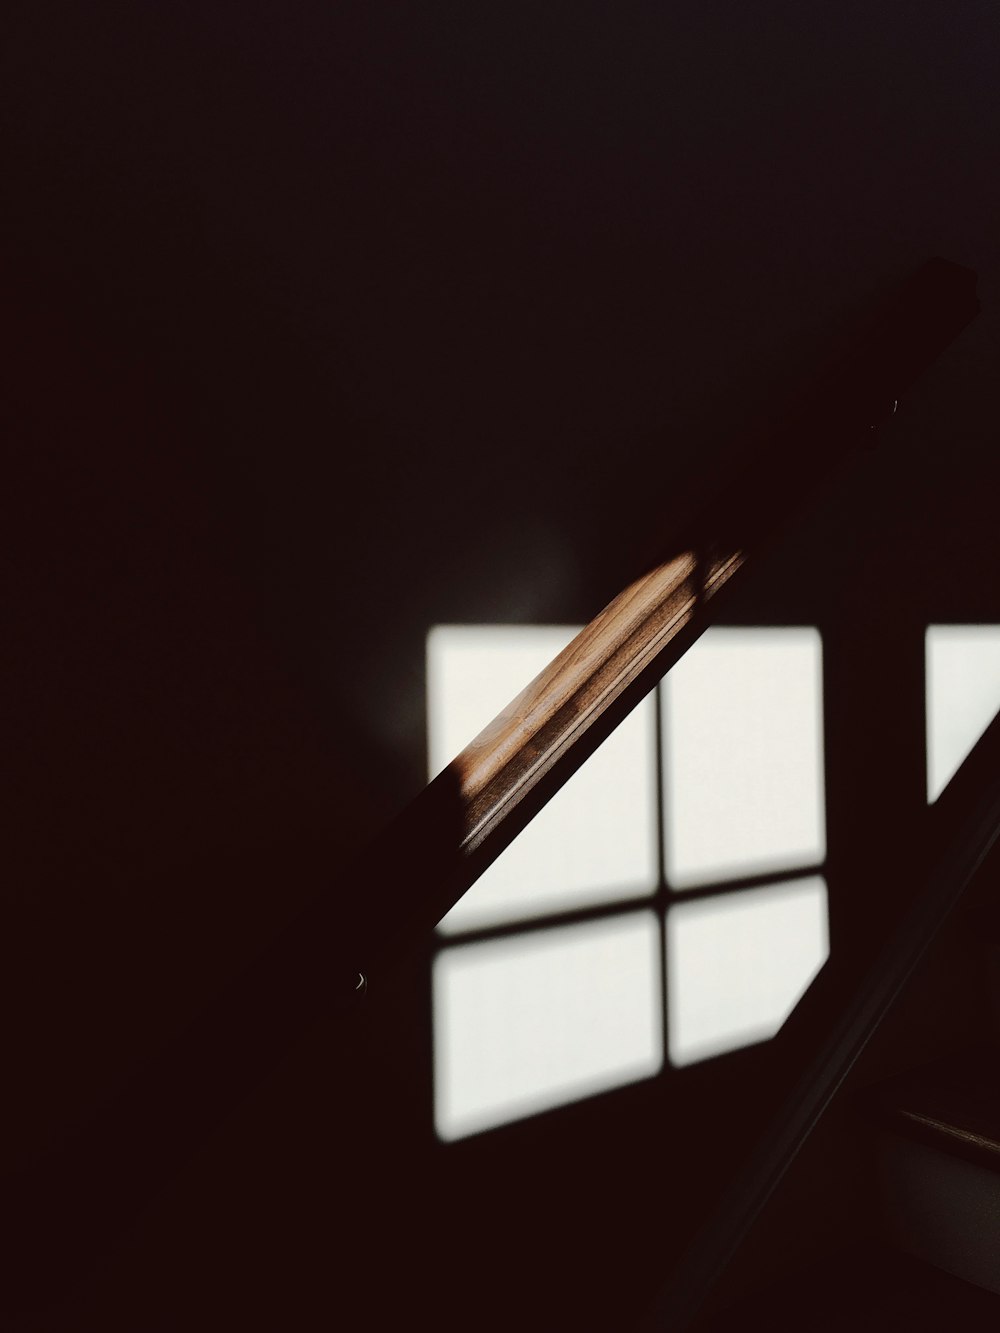 A dim shot of a wooden bannister illuminated by faint light from the window